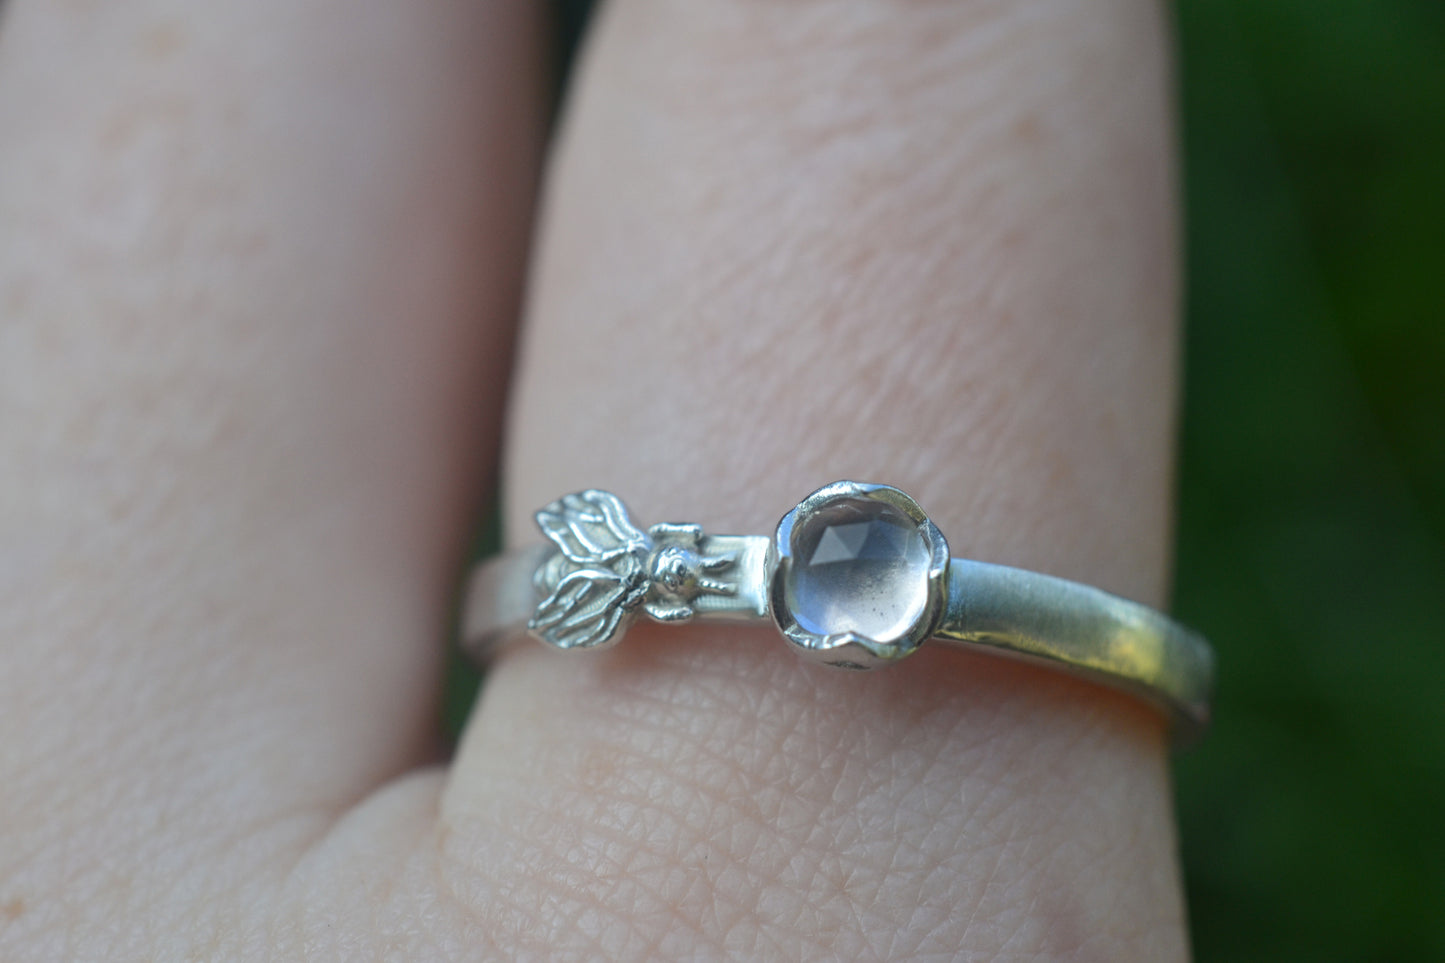 4mm Rose Quartz Ring With Sterling Bee Charm